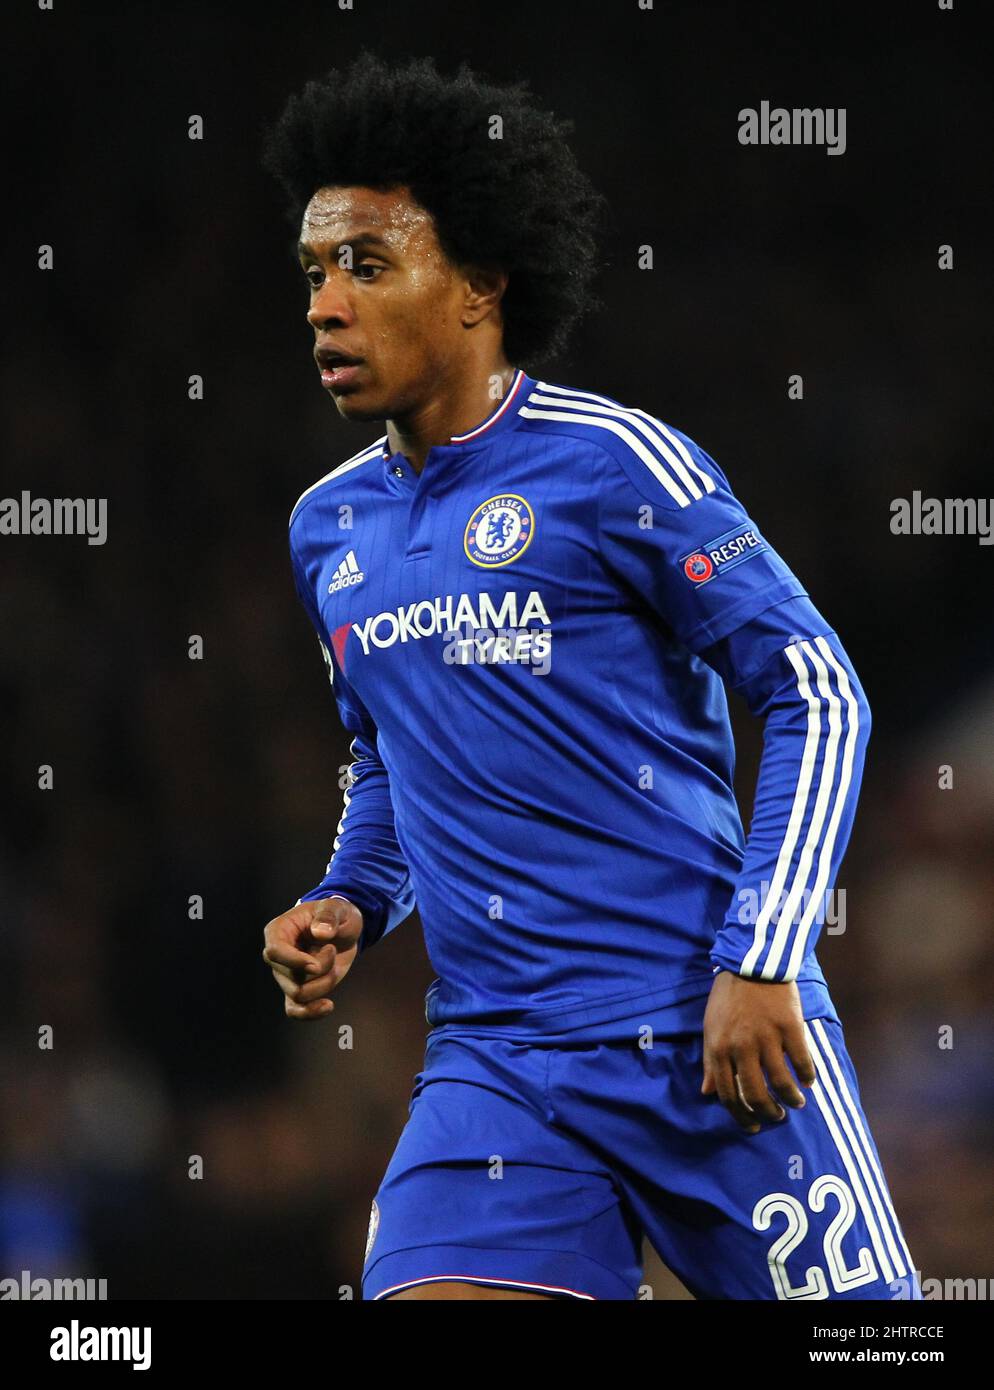 Chelsea’s Willian seen during the UEFA Champions League match between Chelsea and FC Porto at Stamford Bridge in London. December 9, 2015. James Boardman / Telephoto Images +44 7967 642437 Stock Photo